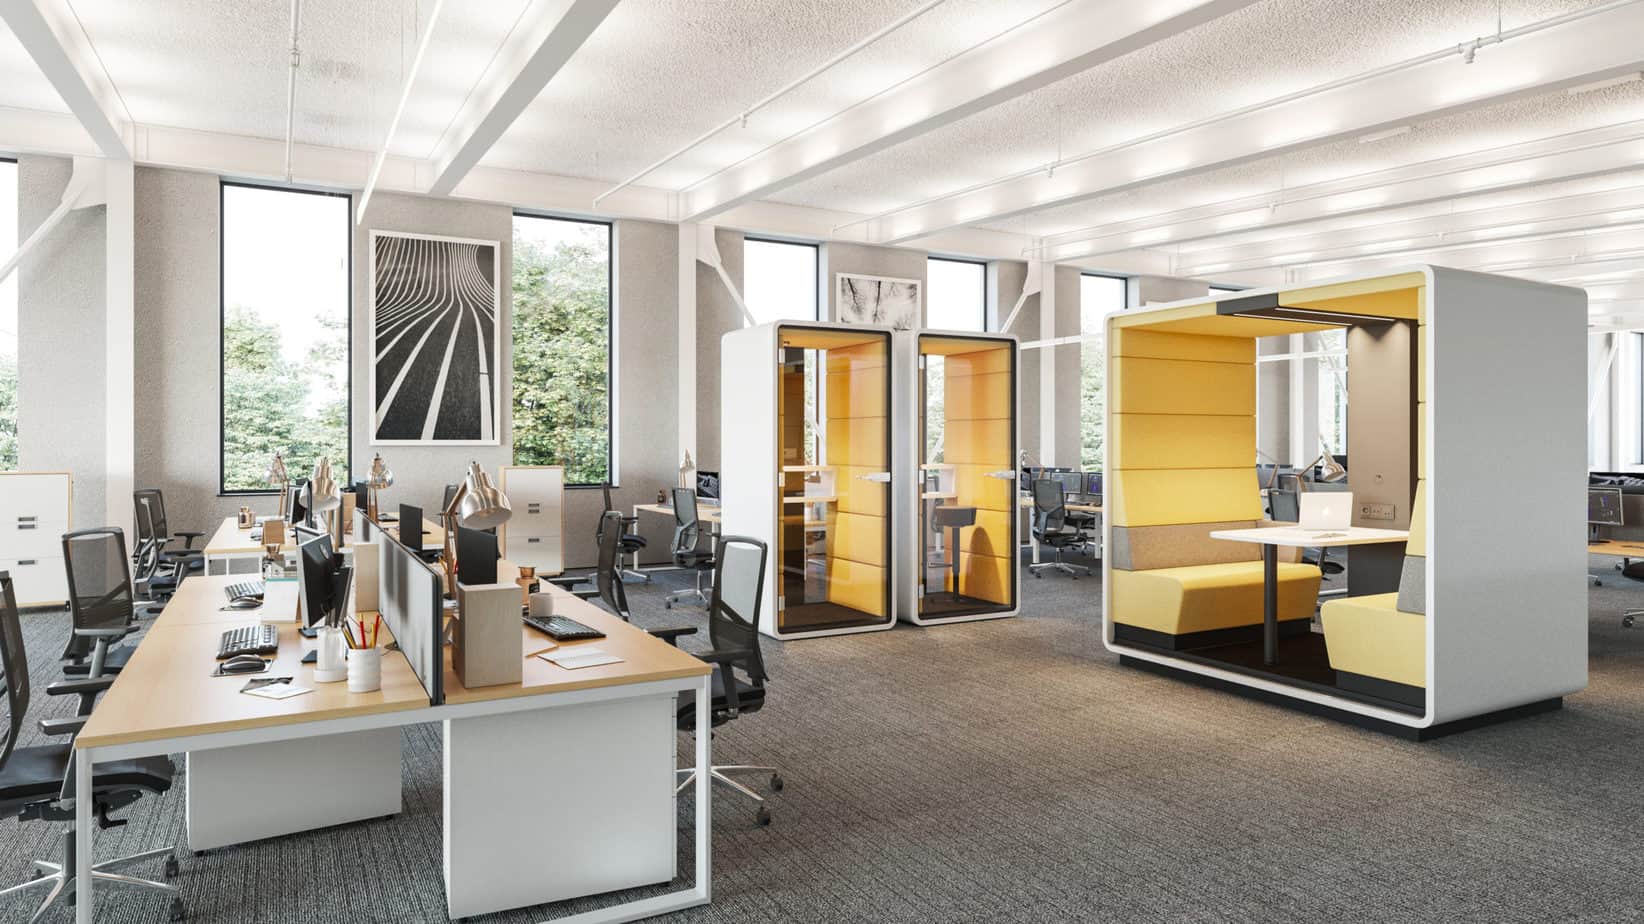 Corporate Office Design And Trends 2021 Eandg Office Space